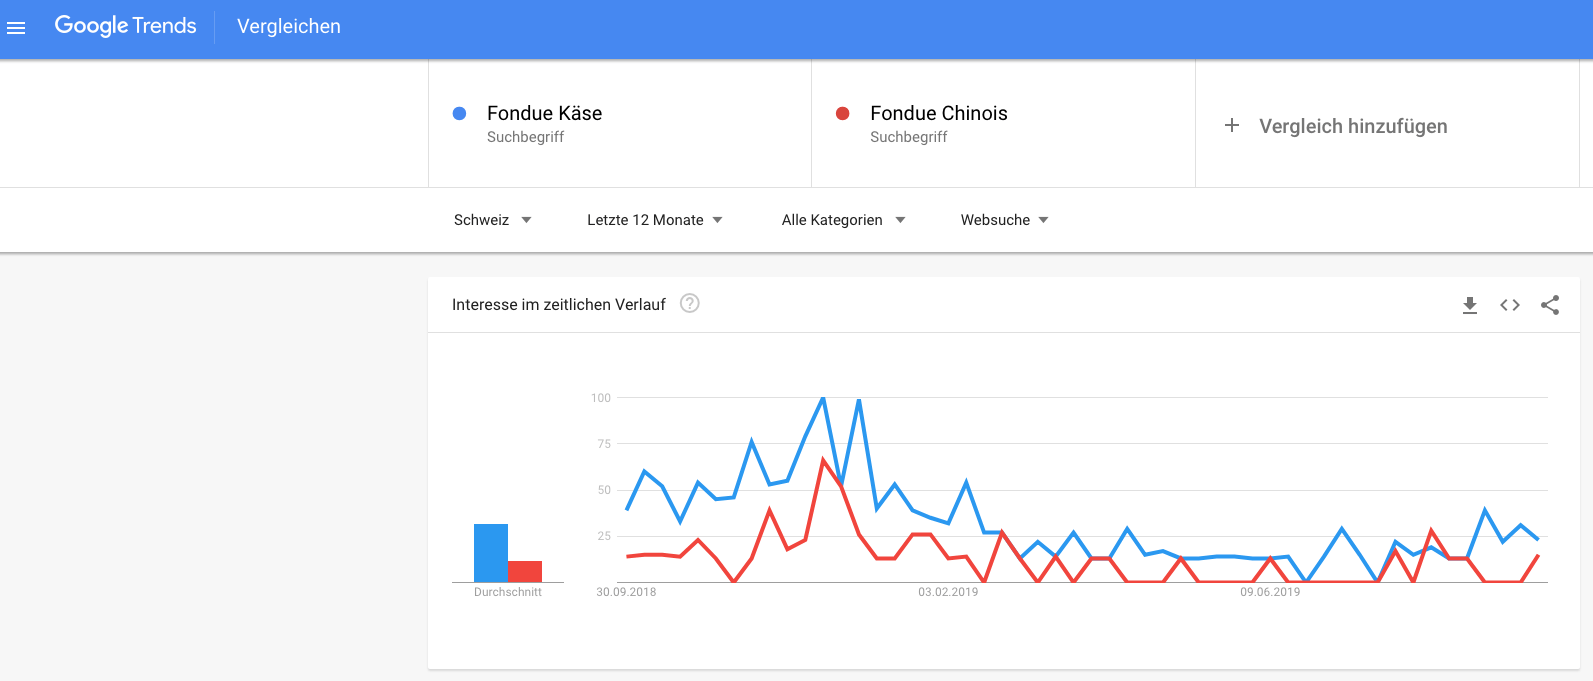 Find keyword Trends with Google Trends